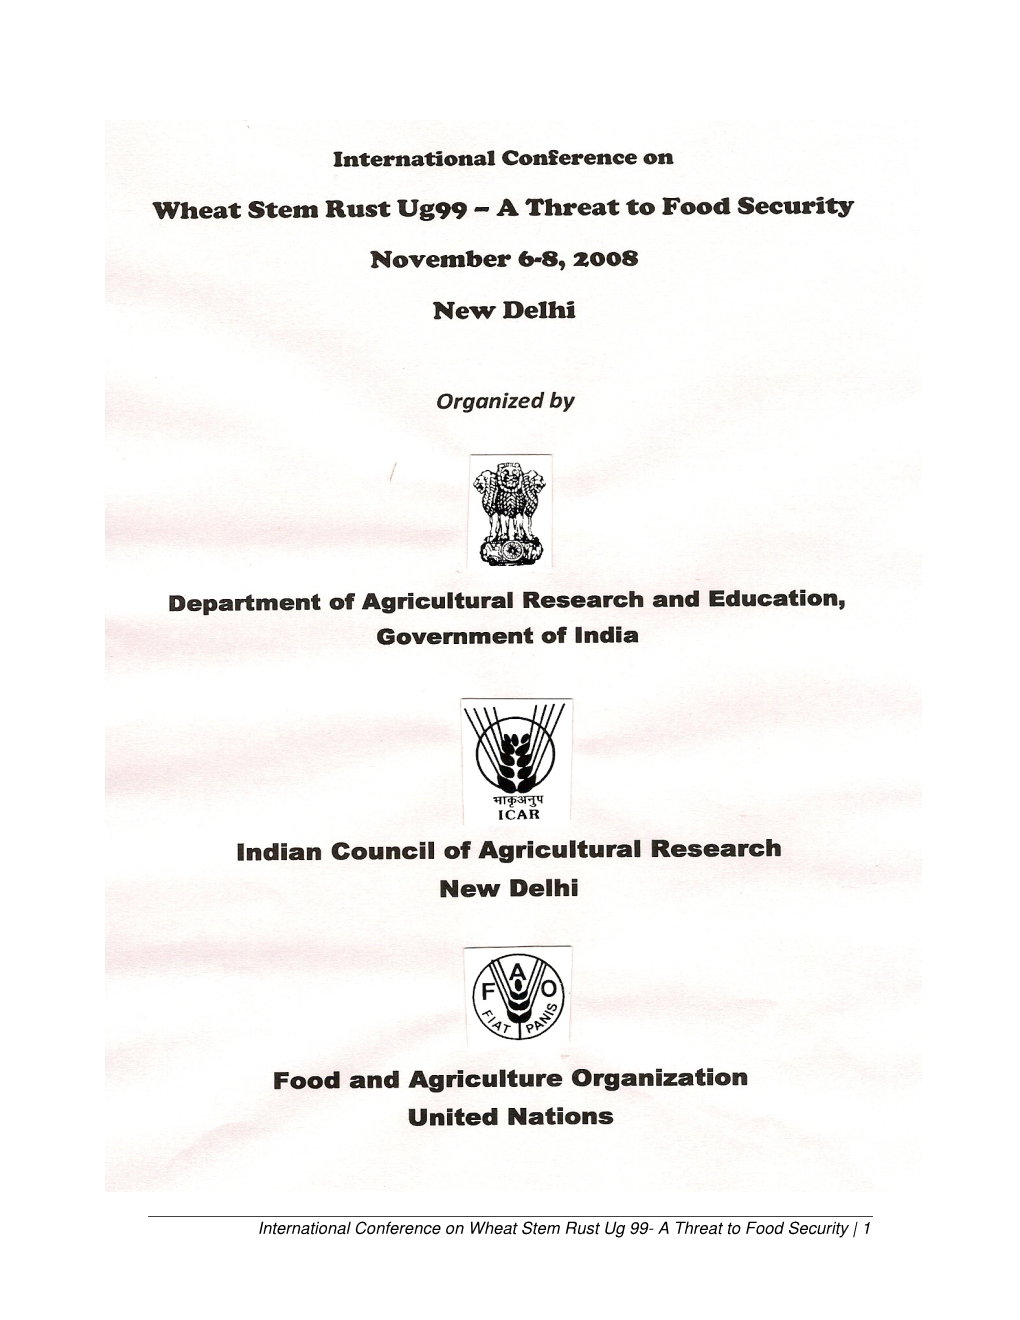 International Conference on Wheat Stem Rust Ug 99- a Threat to Food Security | 1